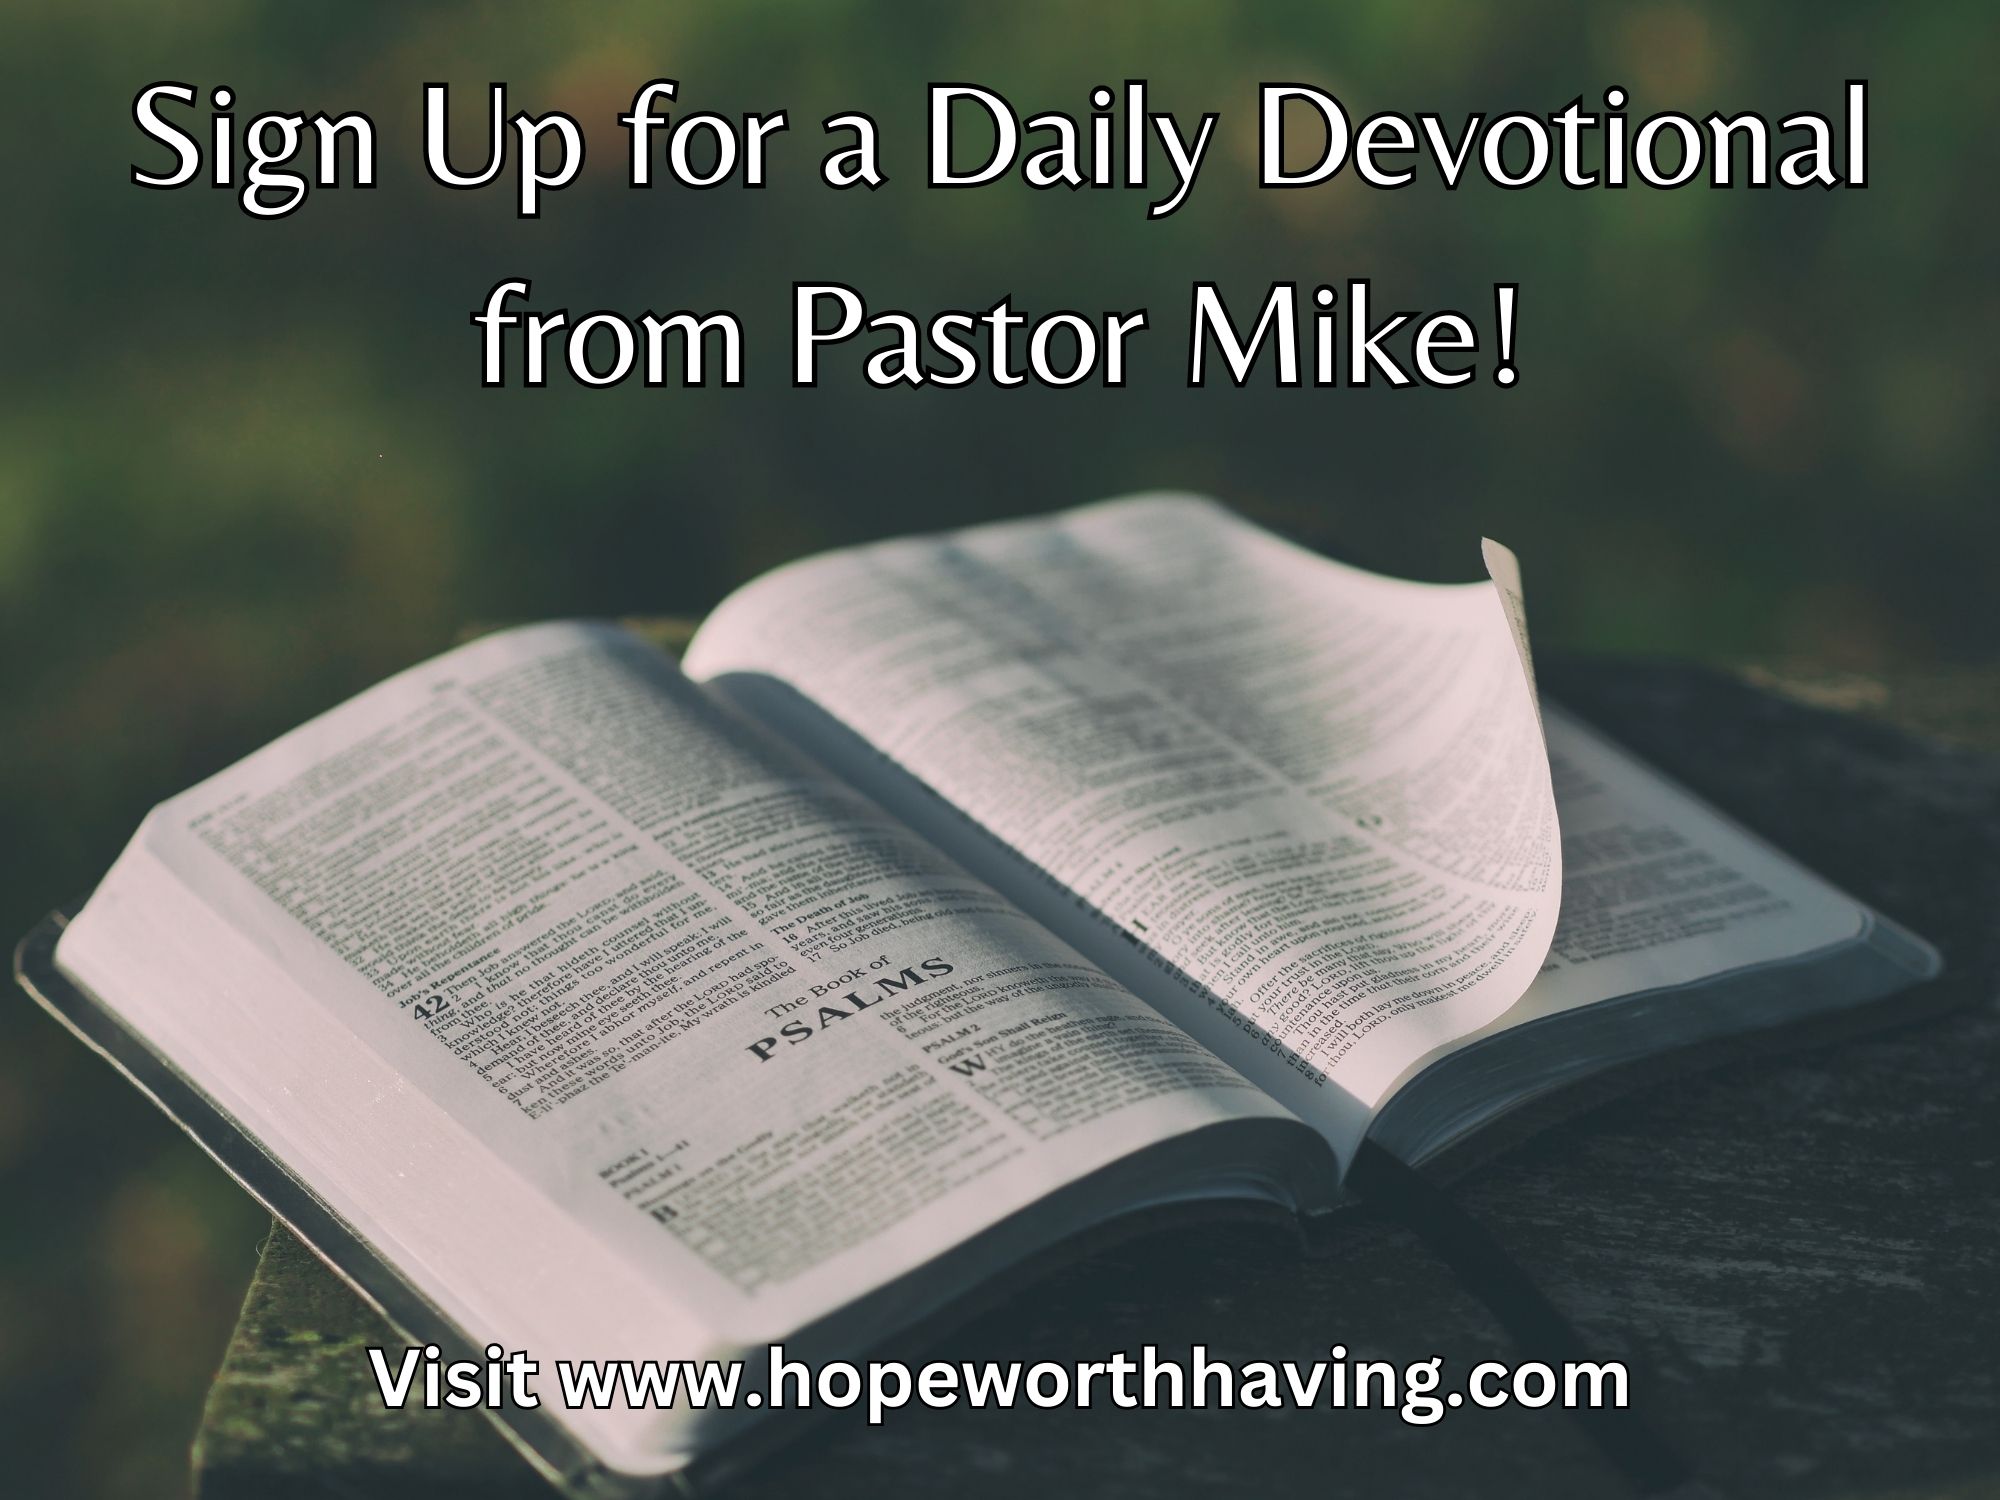 Sign Up for a Daily Devotional!